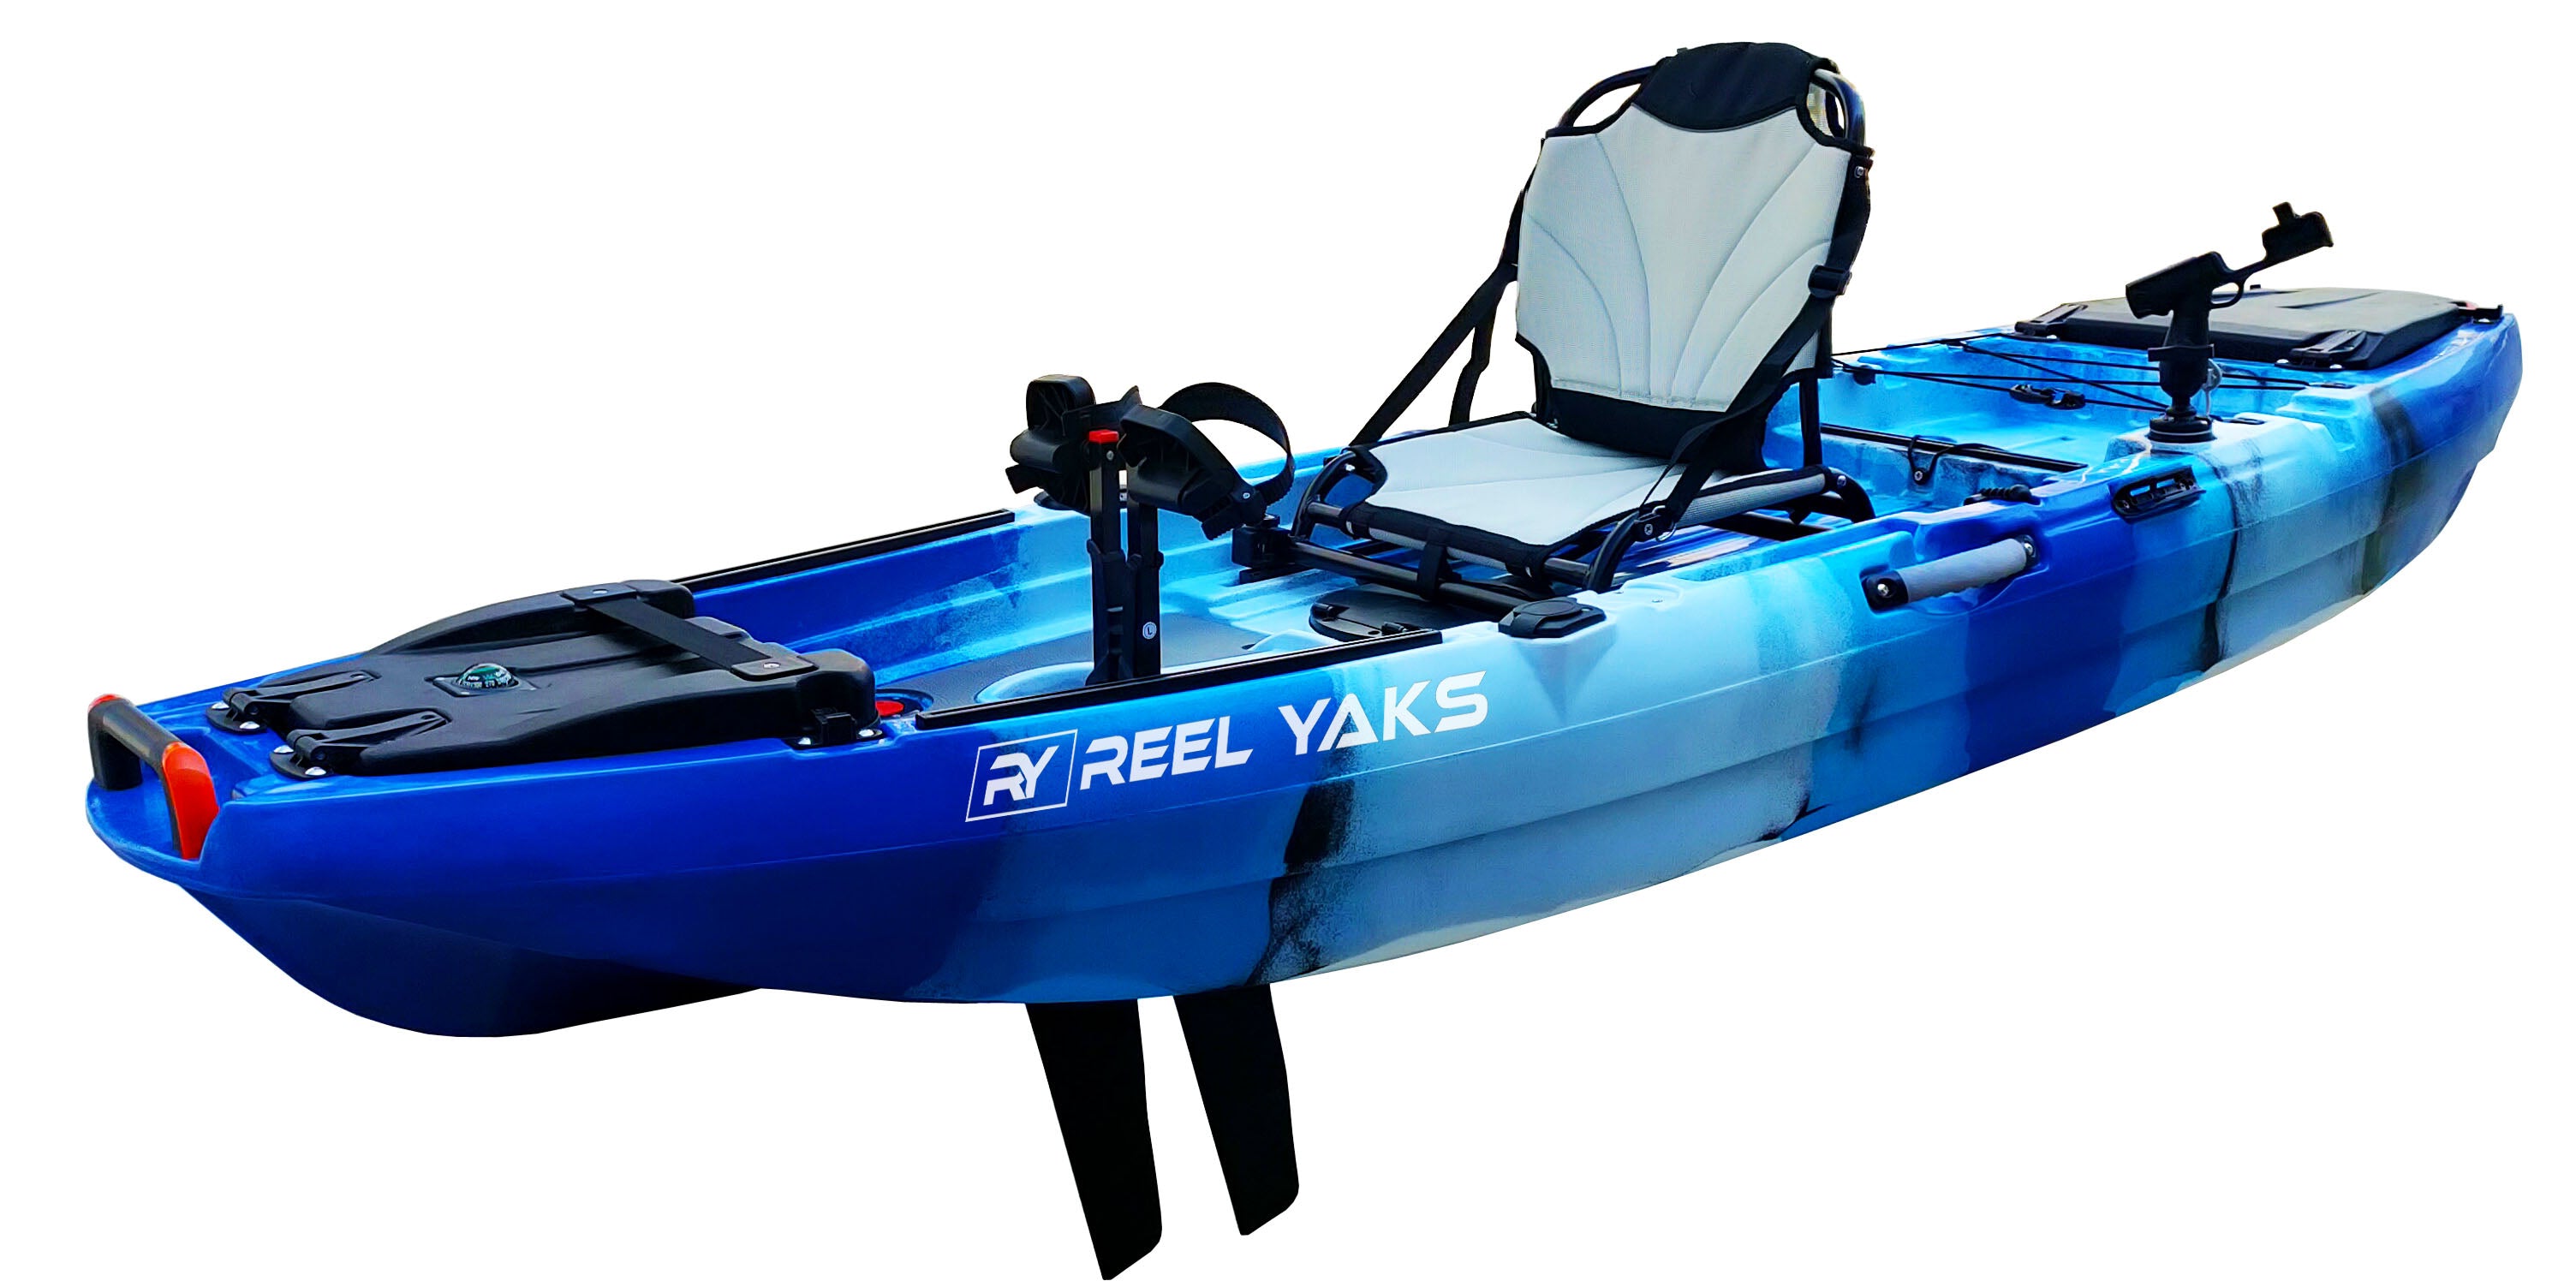 10ft Kayak with Pedal Kayaks Rowing Boat Foot Propel Angler Sport